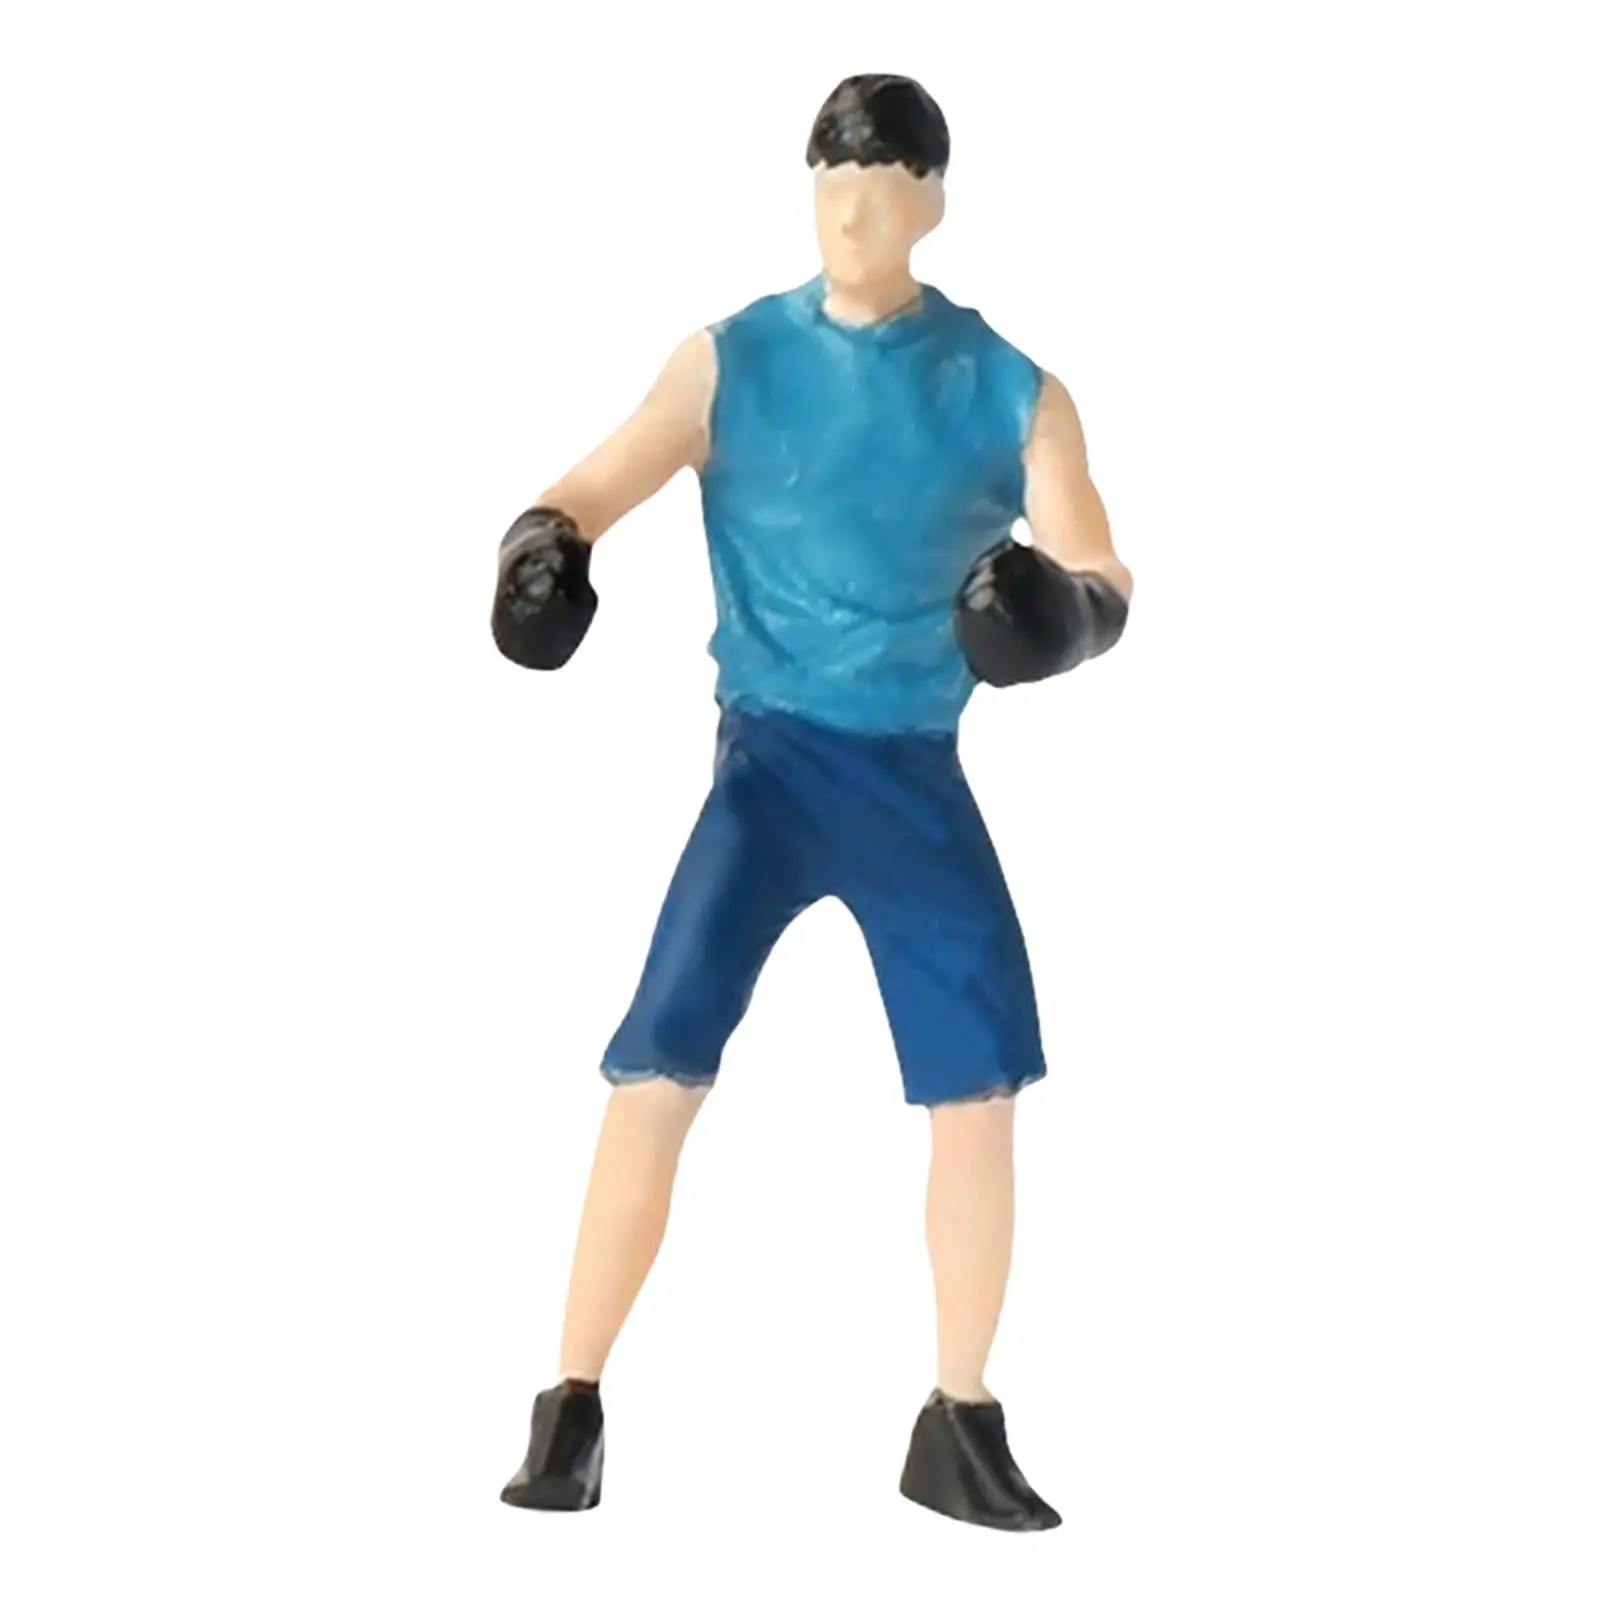 Miniature 1/64 Figures Boxing Figurines Collection Mini Model Sandtable Decoration Ornaments for DIY Scene Dollhouse Layout